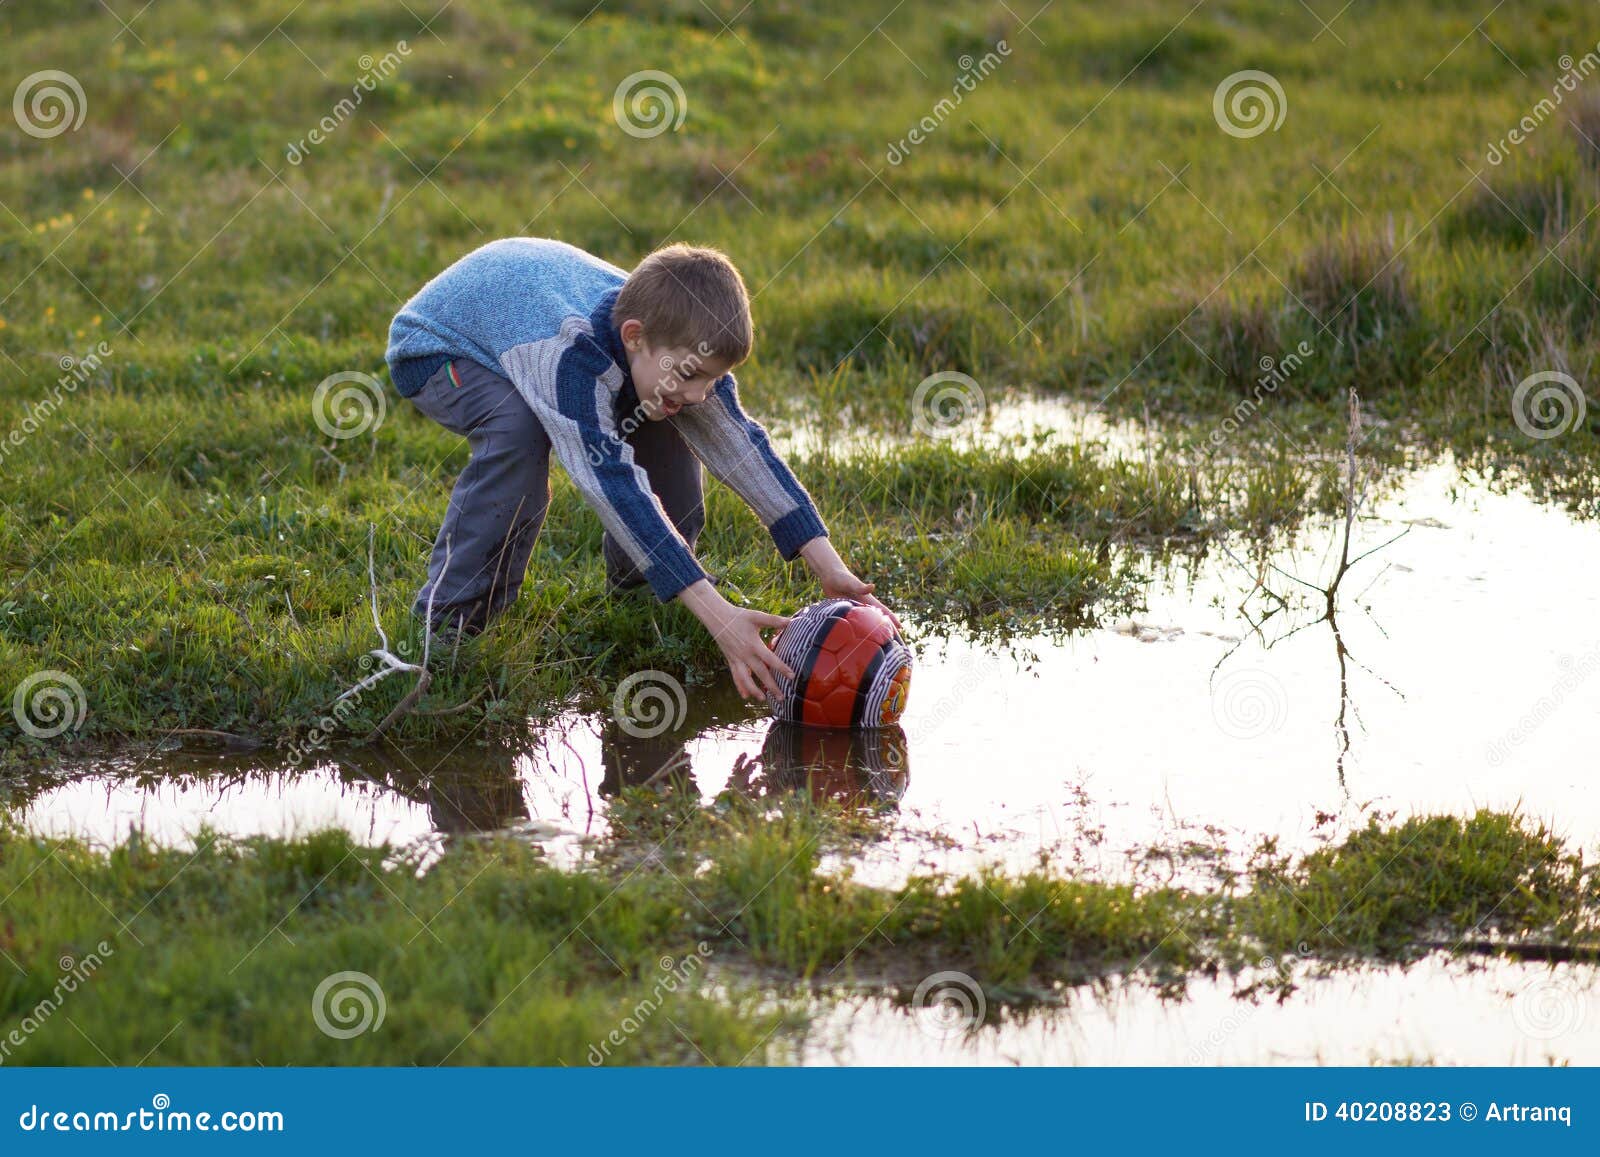 boy gets ball with puddles in the grass